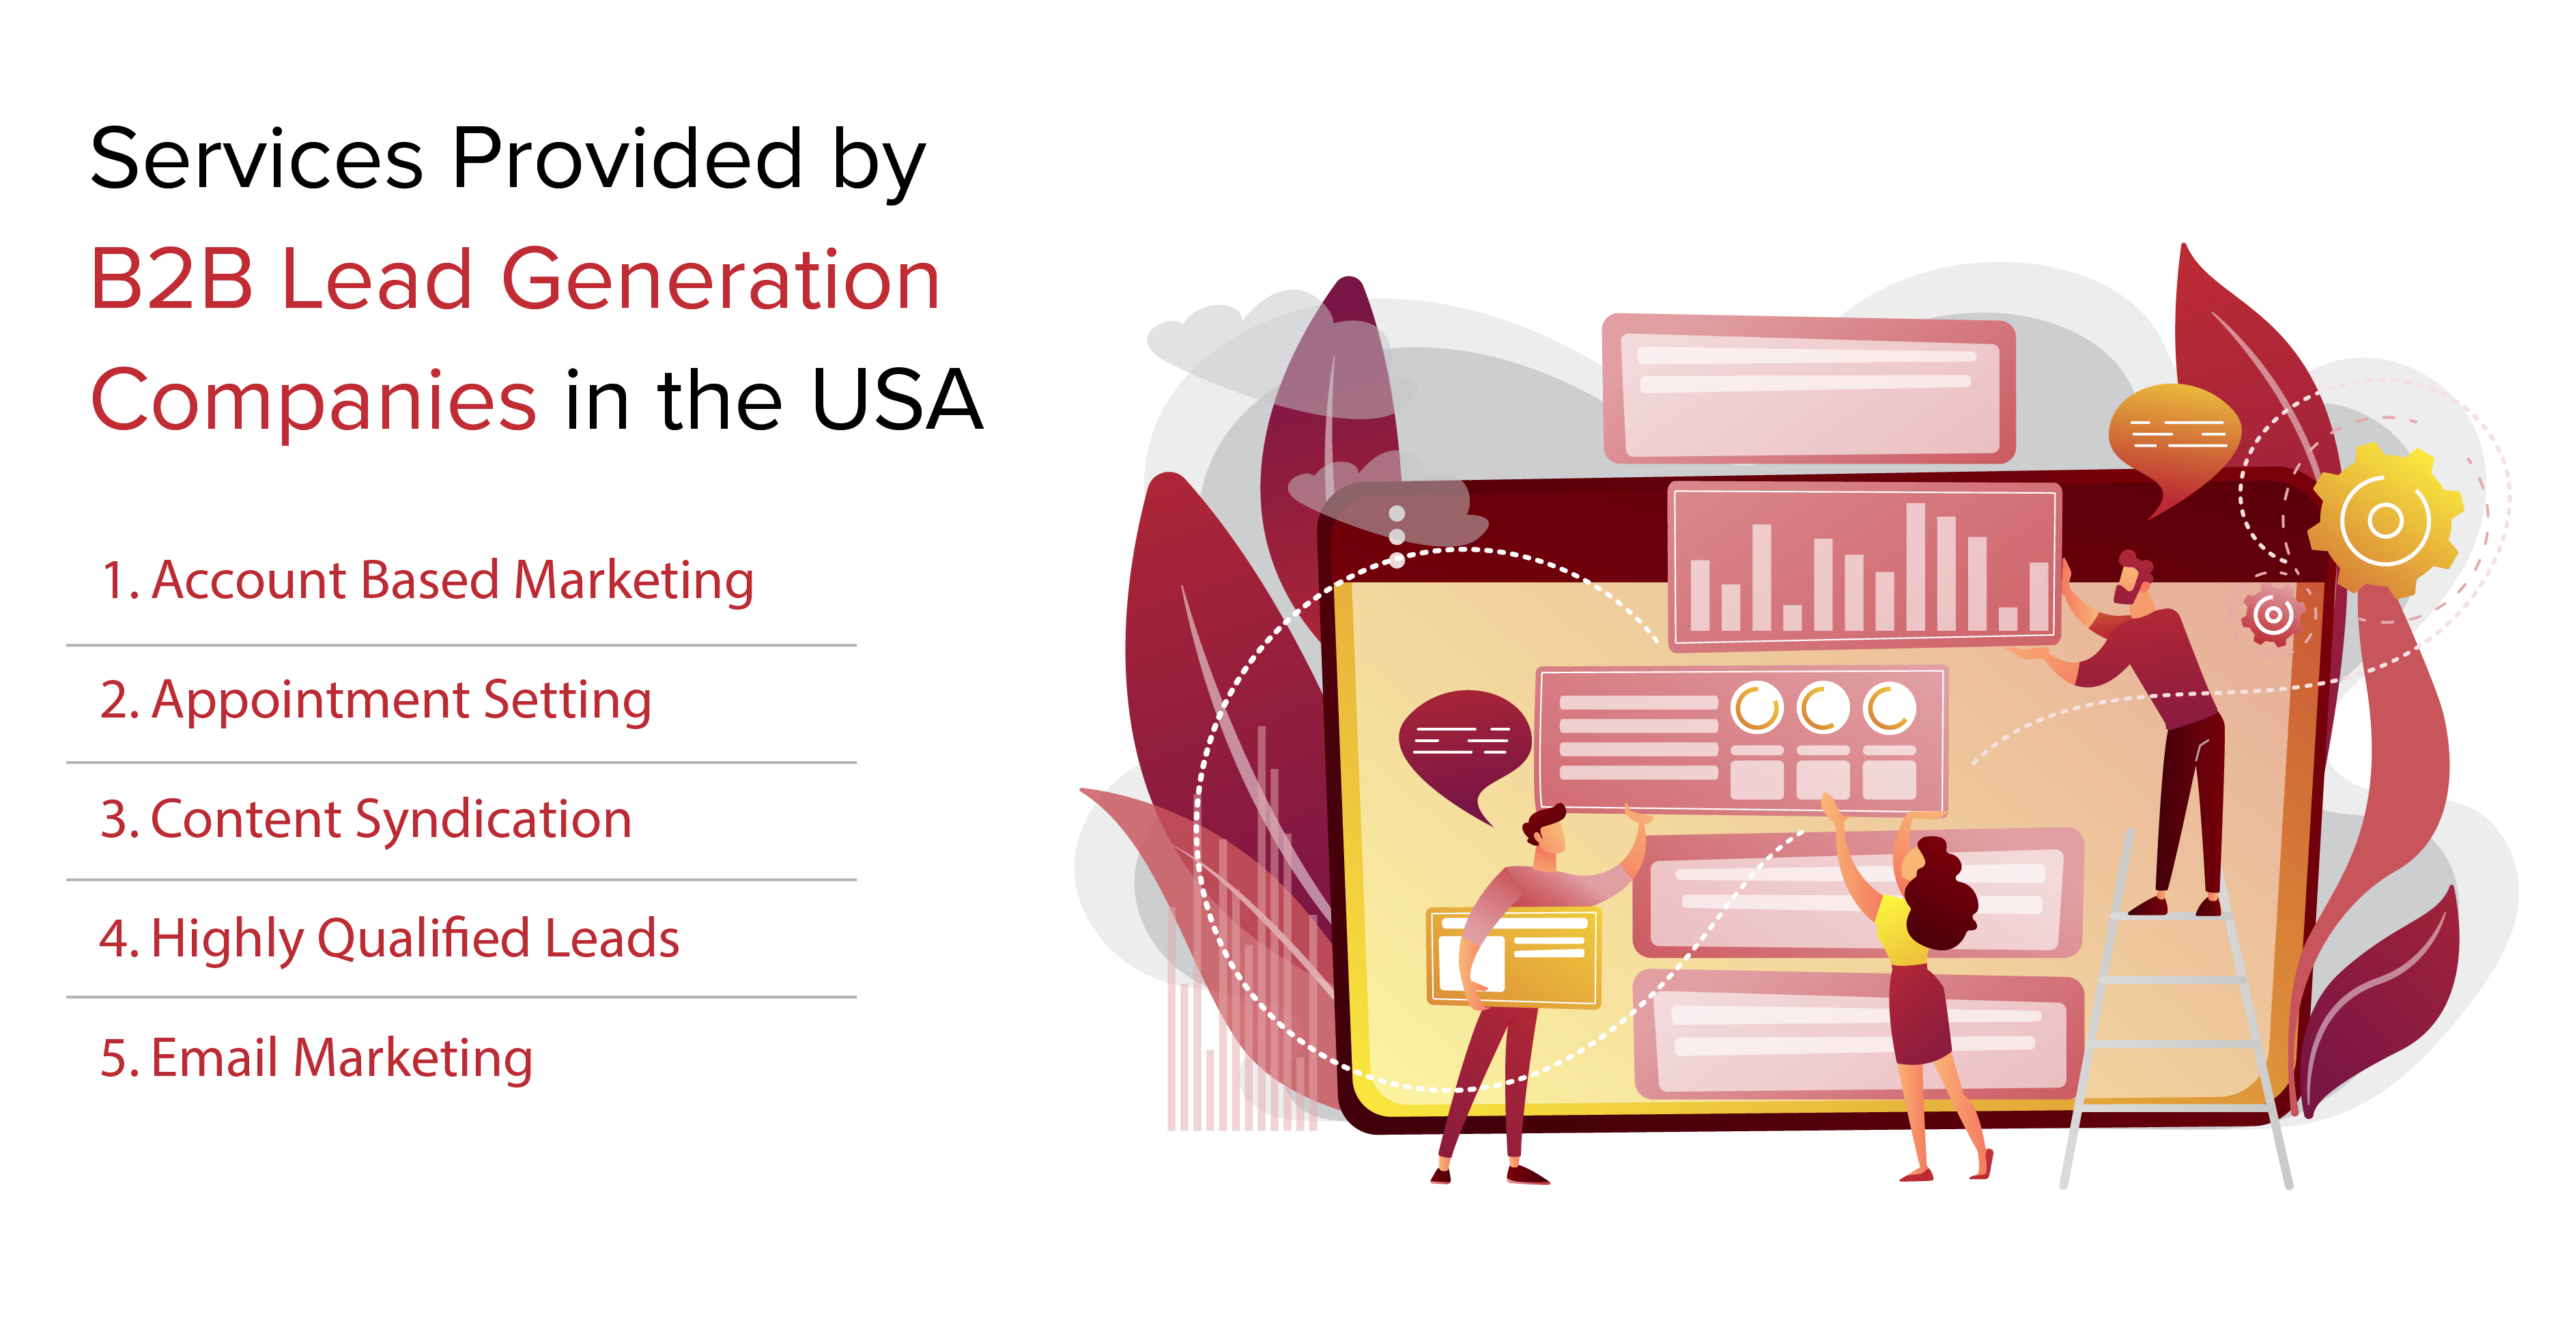 Services Provided by B2B Lead Generation Companies in the USA